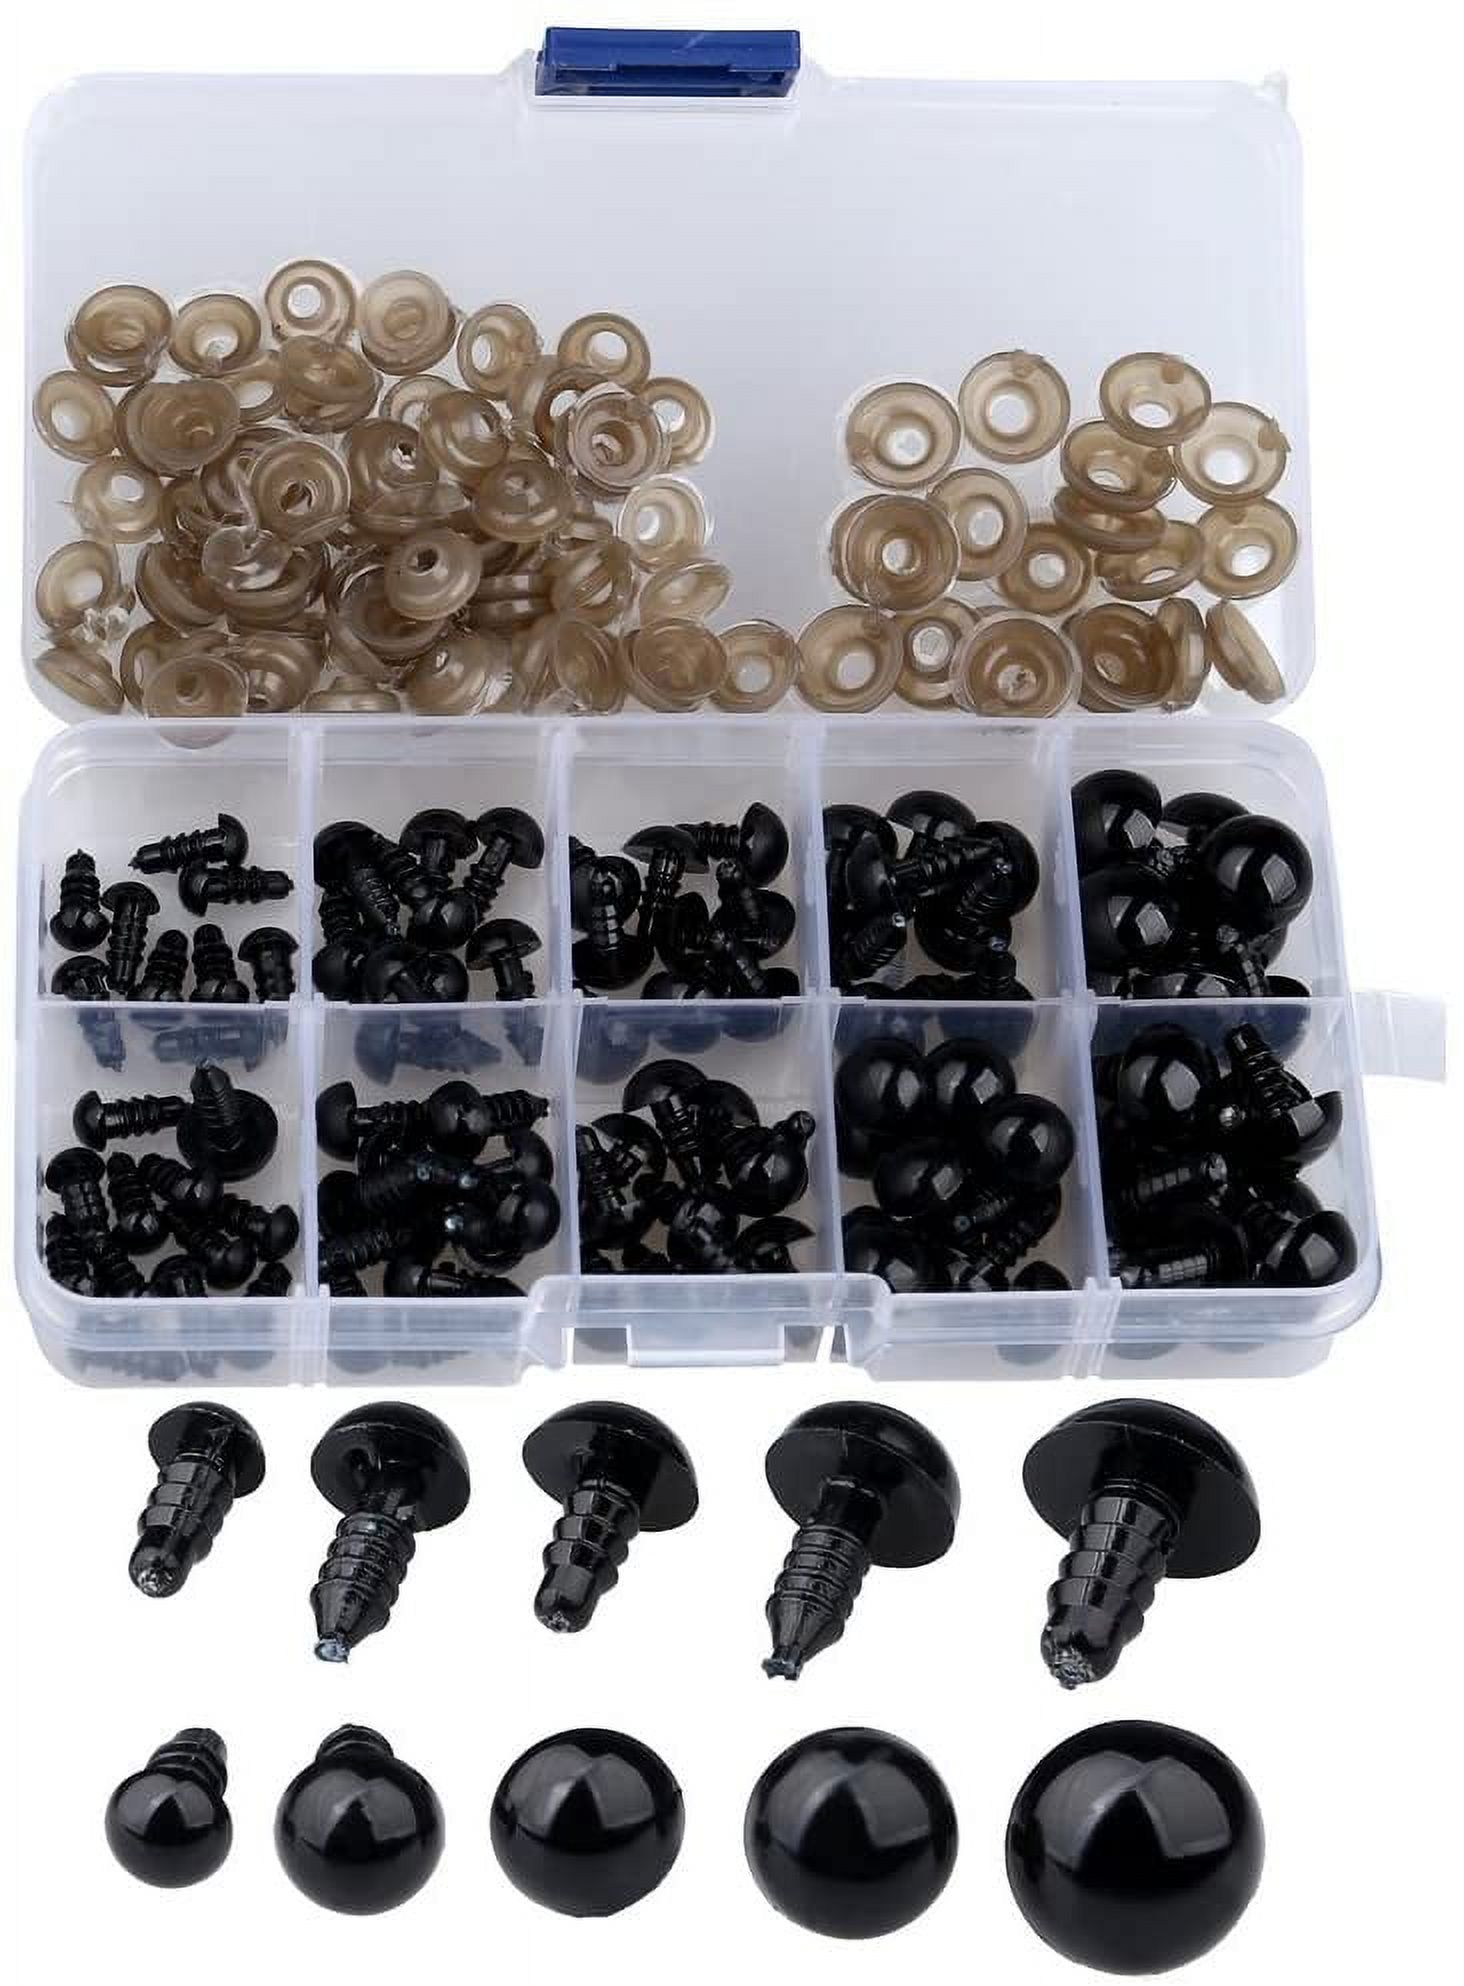 200 pcs 6-12 mm Plastic Safety Eyes, Black Safety Eyes Doll Making with  Washer for Toy Making DIY Crafts 